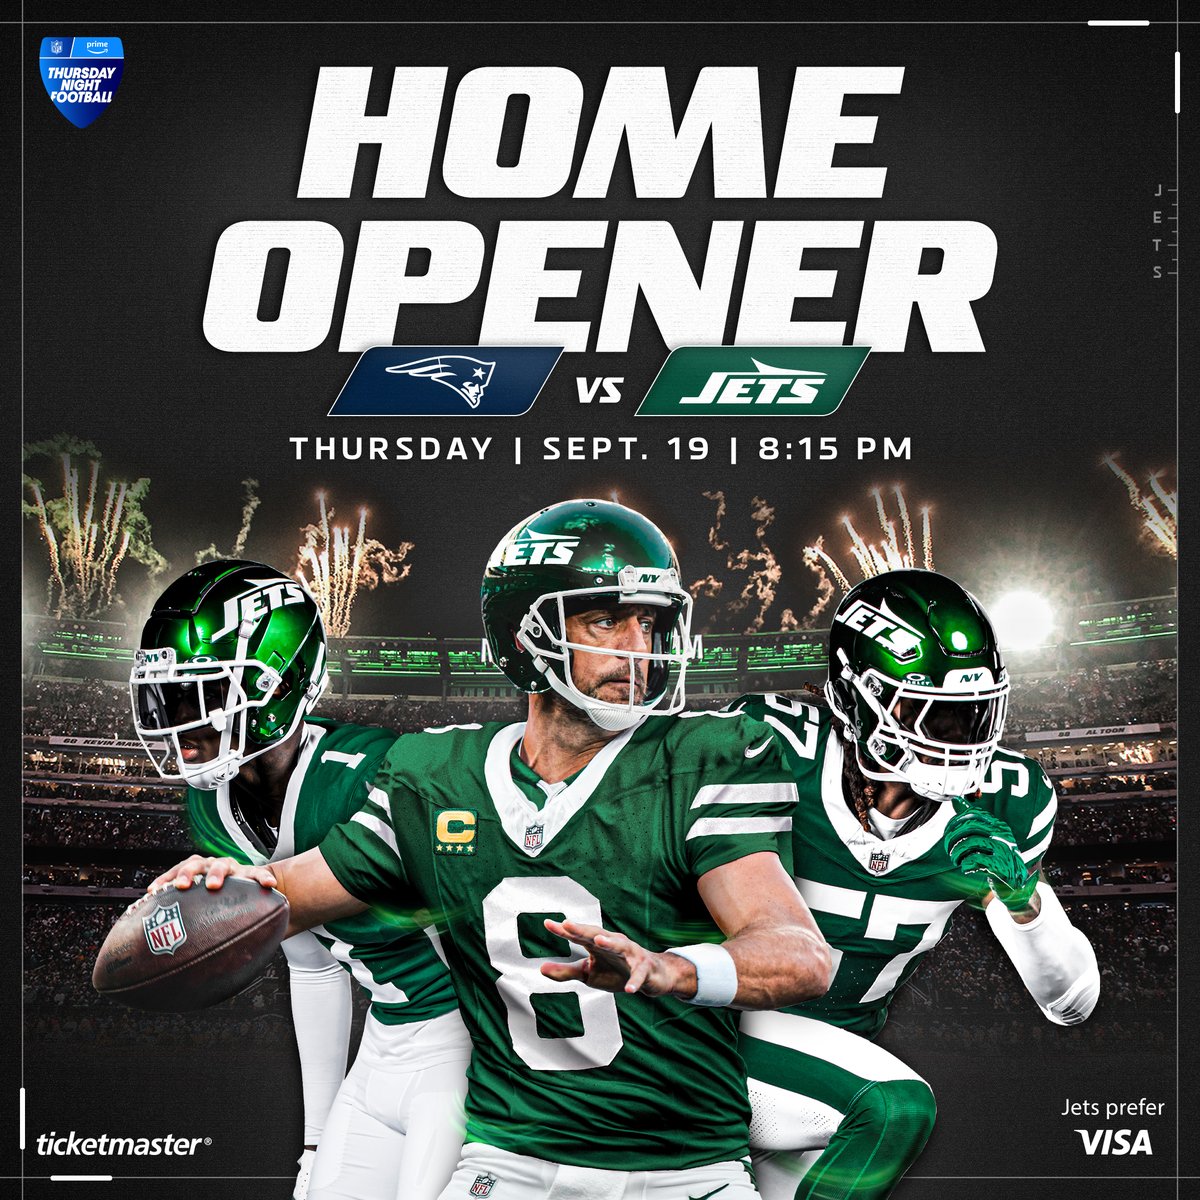 Division rivals meeting at OUR HOUSE. @Visa presale happening now ➡ nyjets.com/tickets